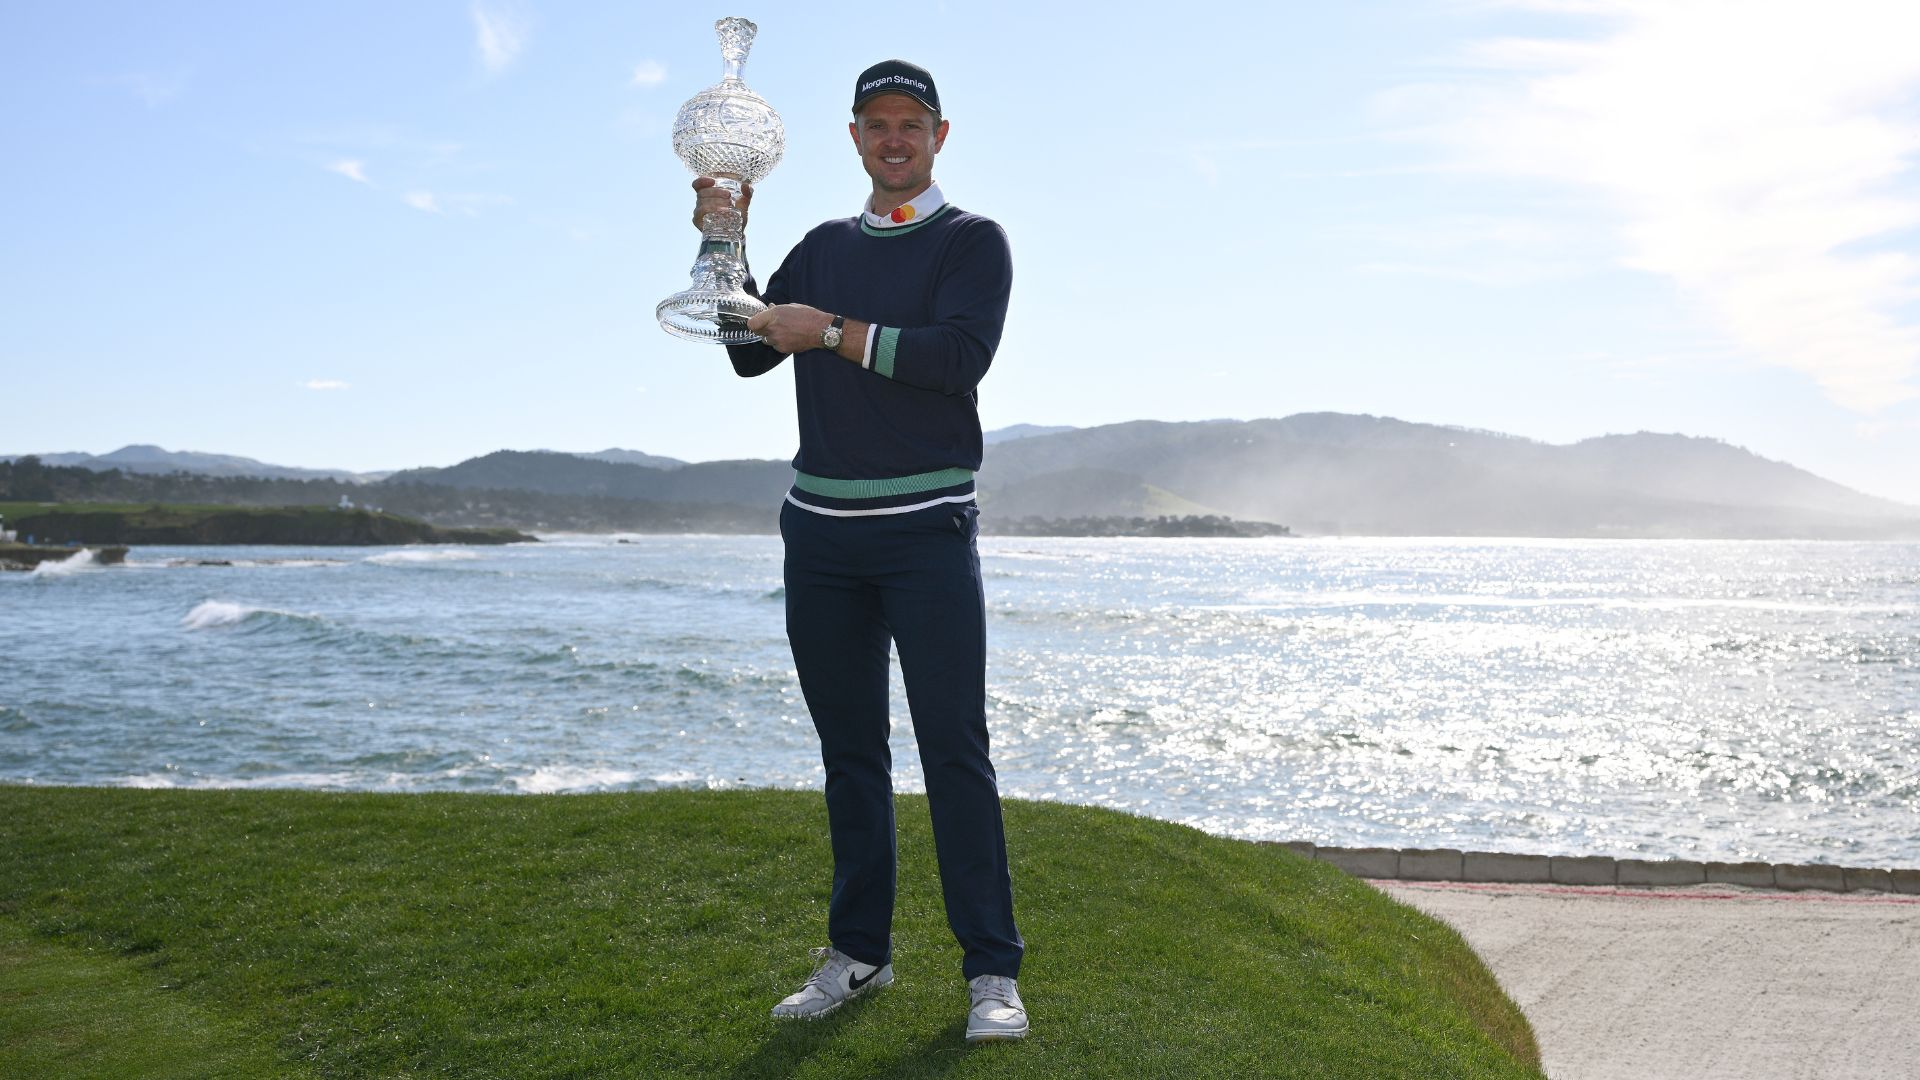 AT&T Pebble Beach Pro-Am payout: Justin Rose cashes first win in four years